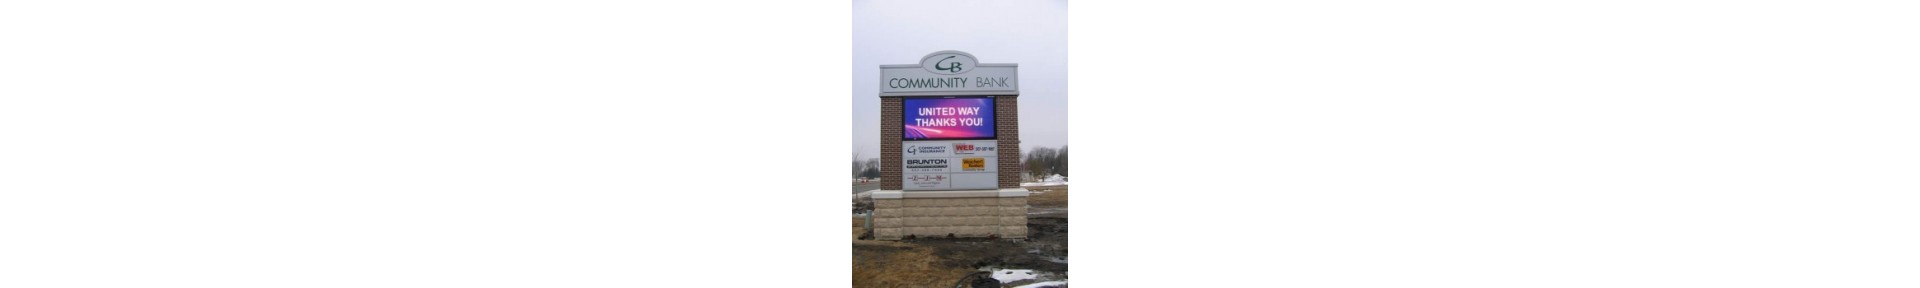 Pylon Sign with Electronic Message Canada | SignsOutlet